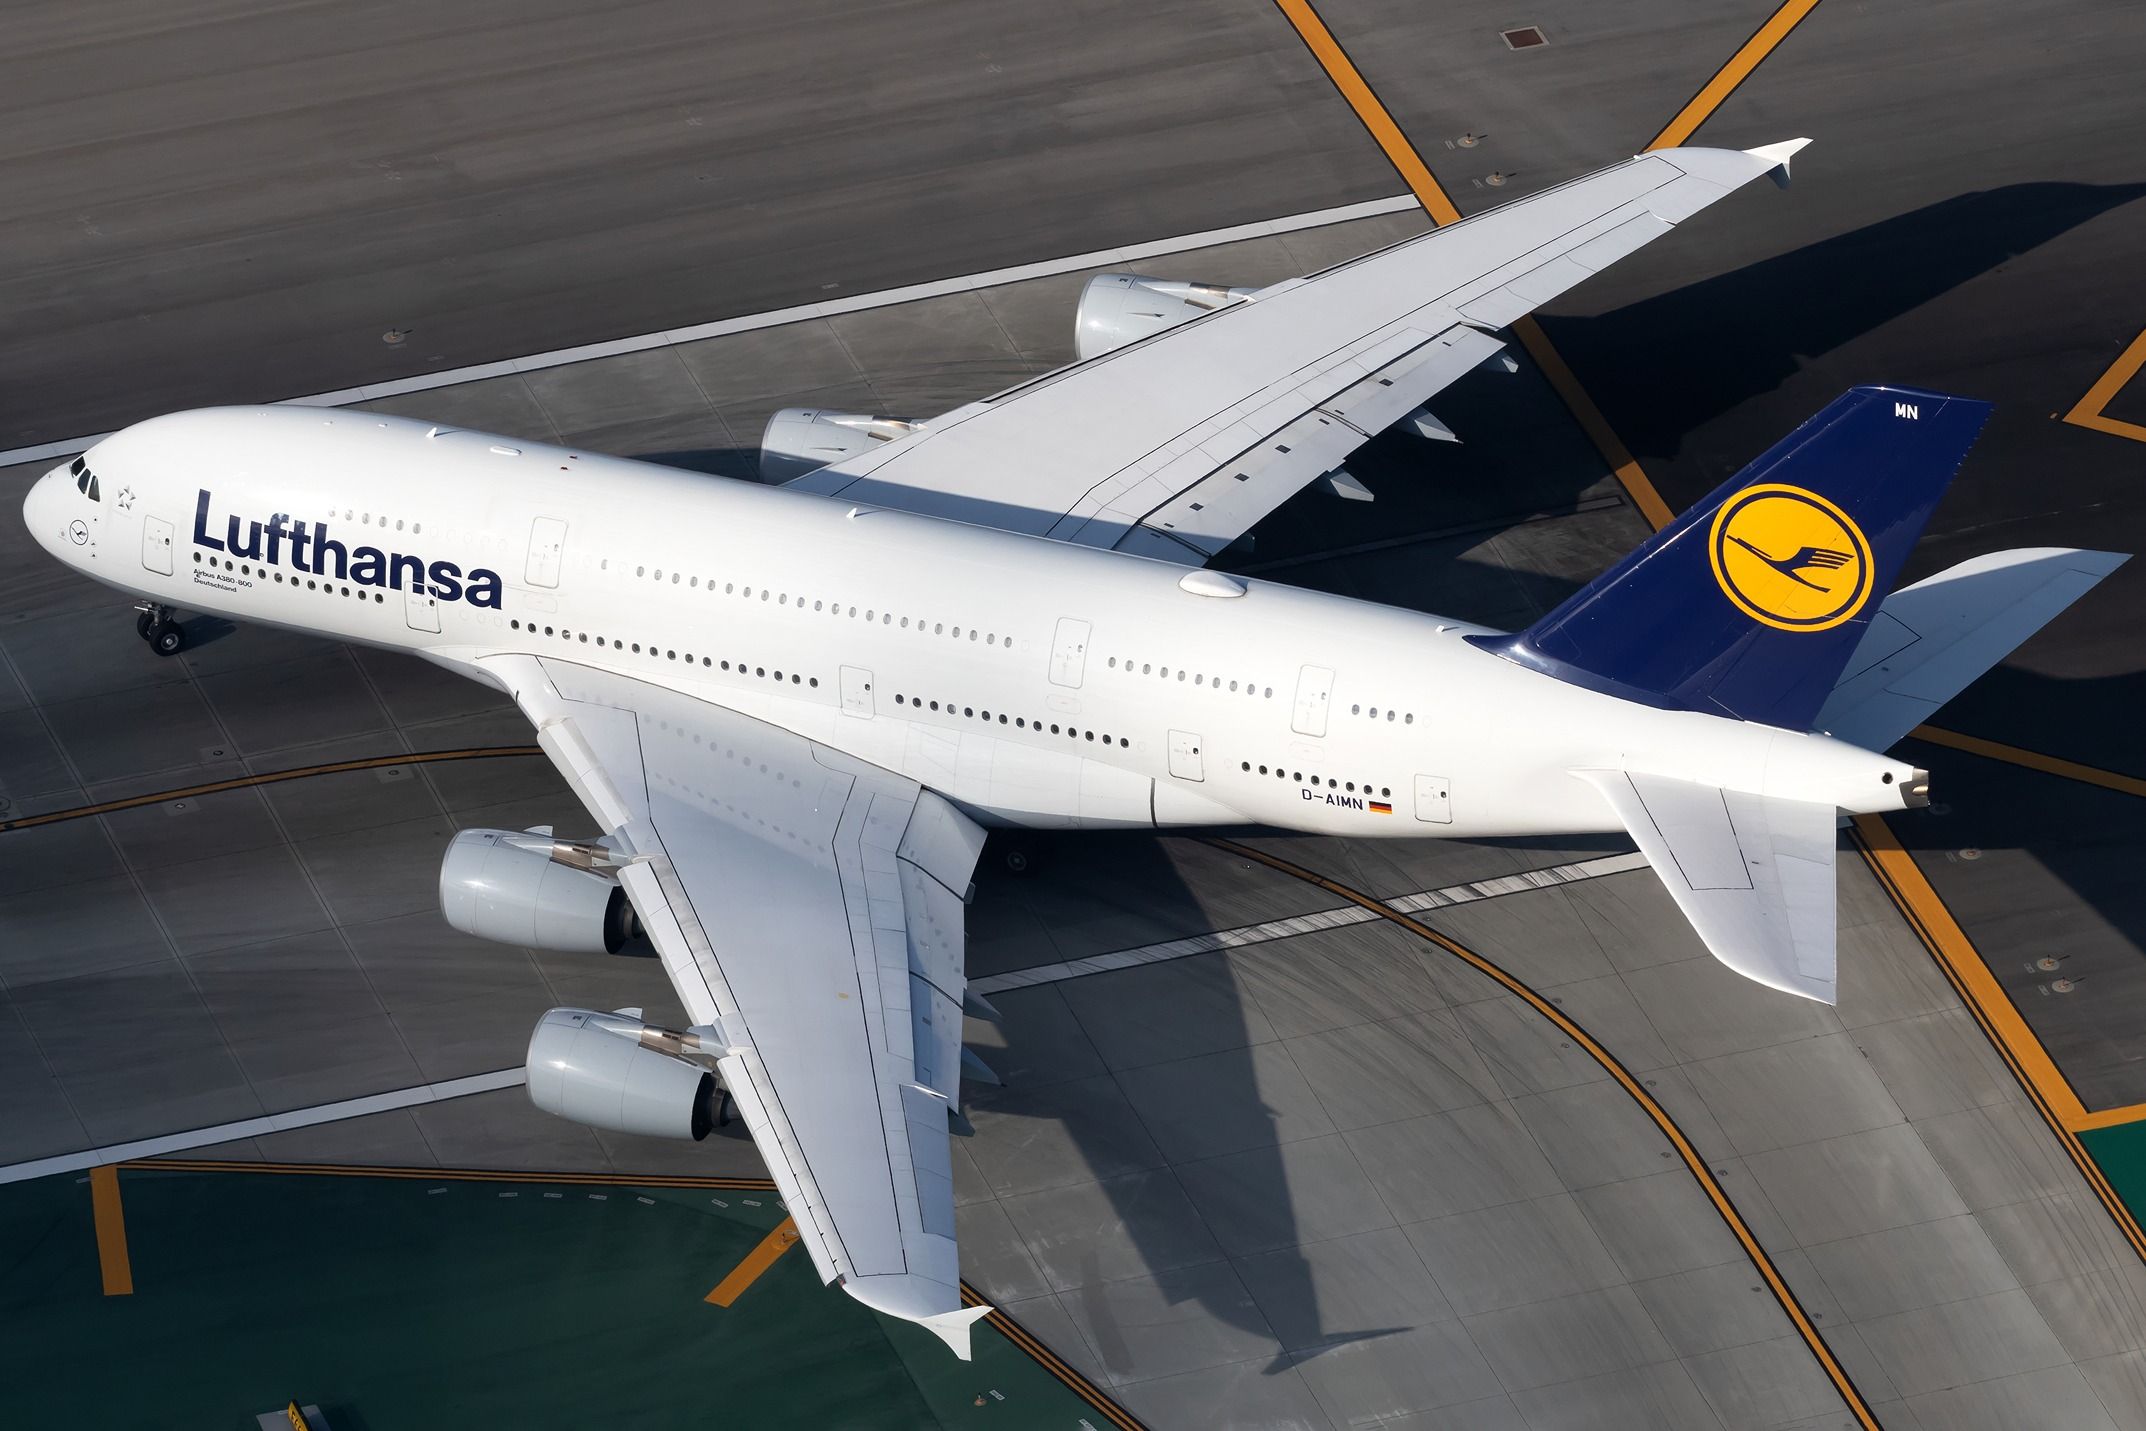 Lufthansa Airbus A380 taxiing at LAX